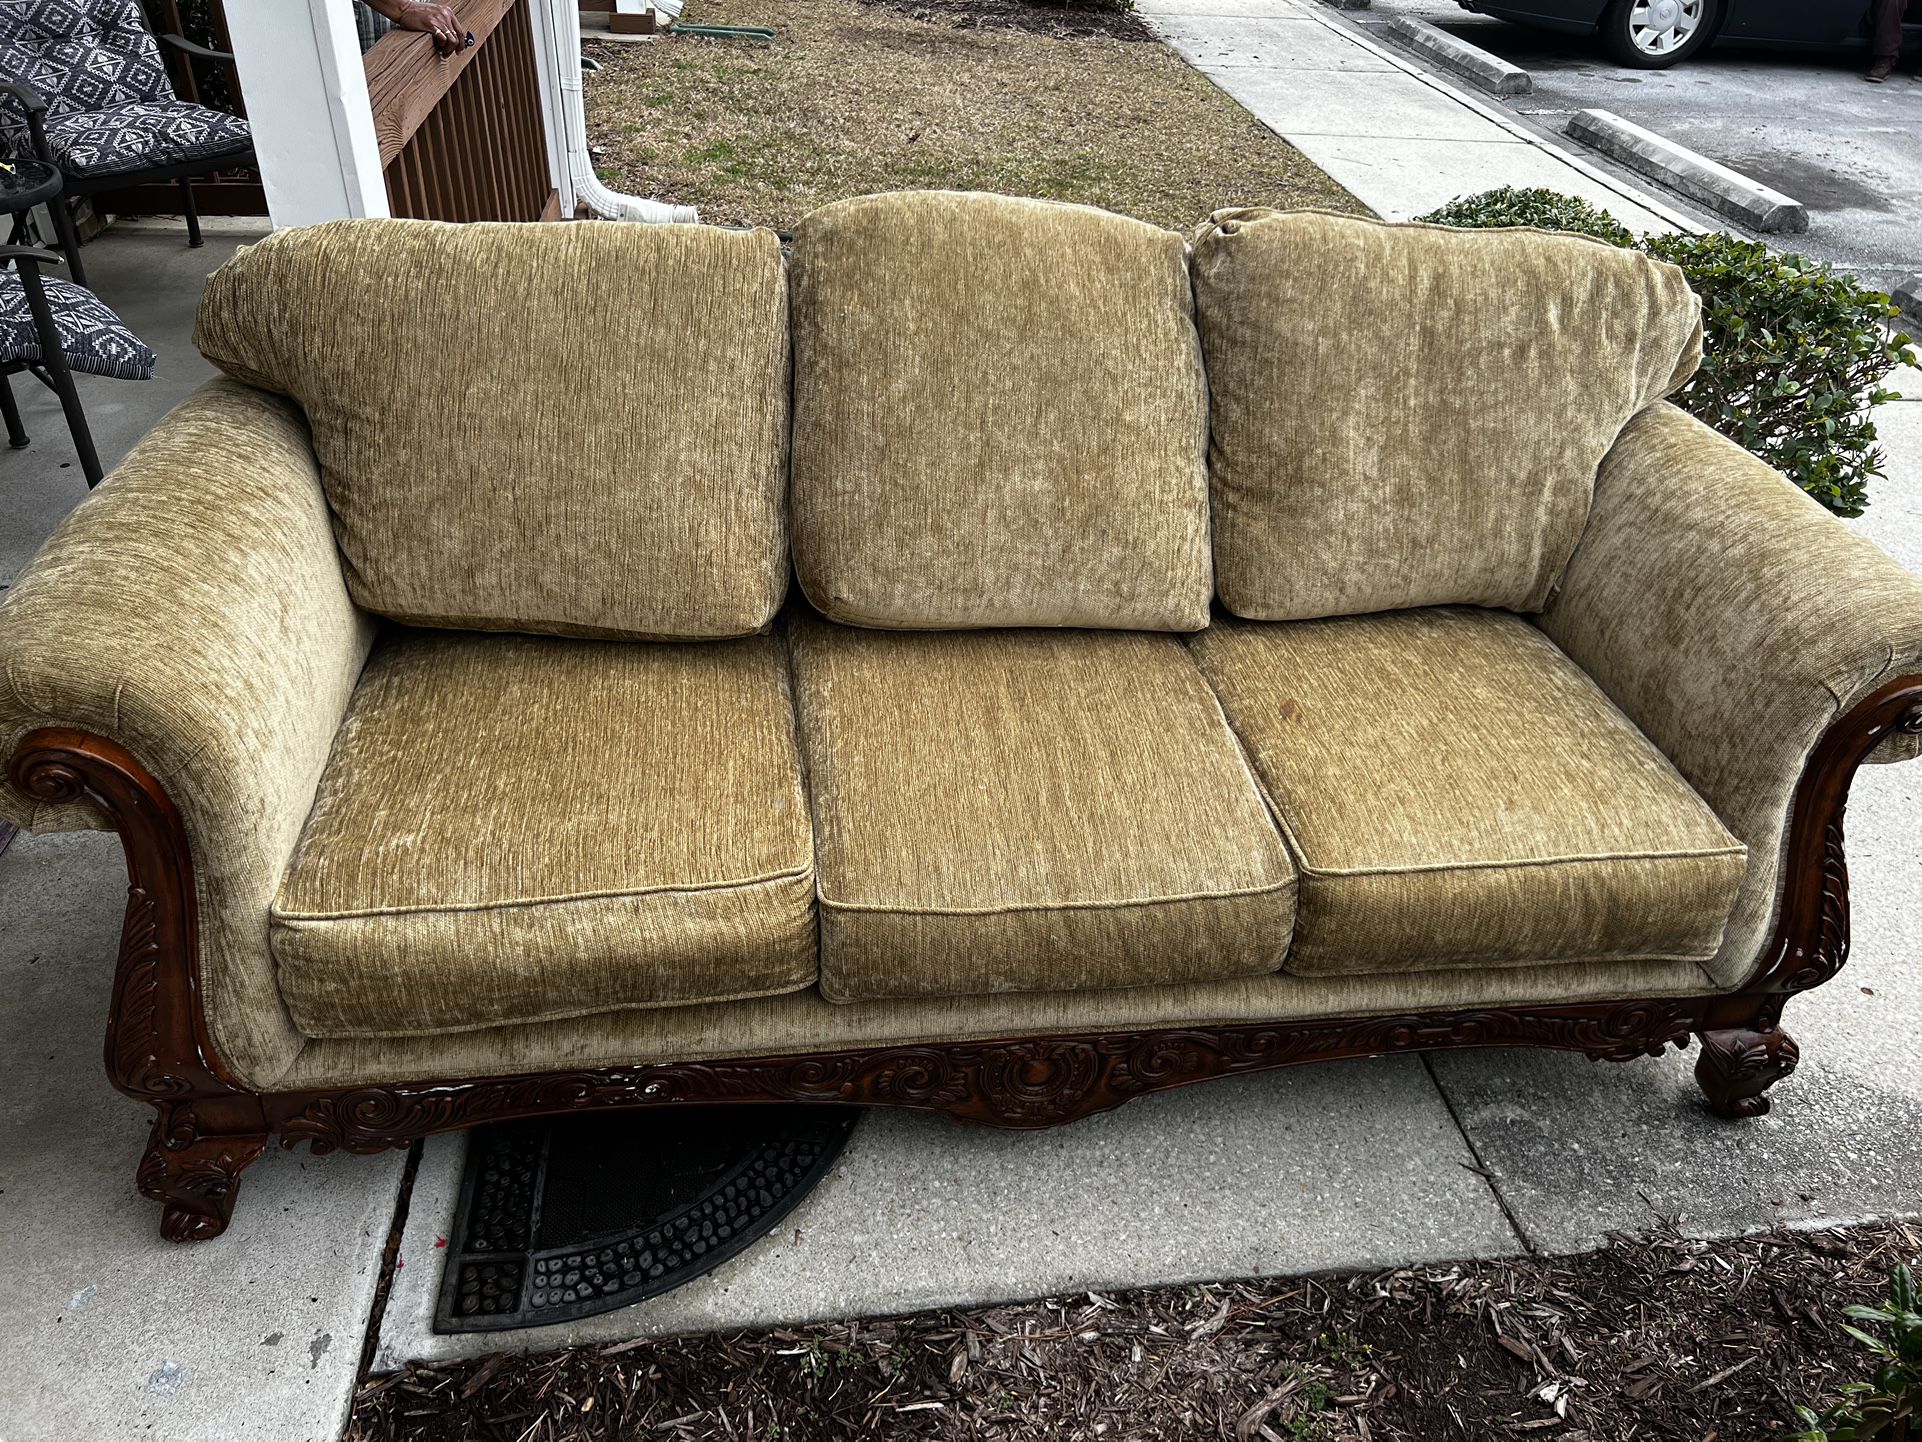 Like New Couch 